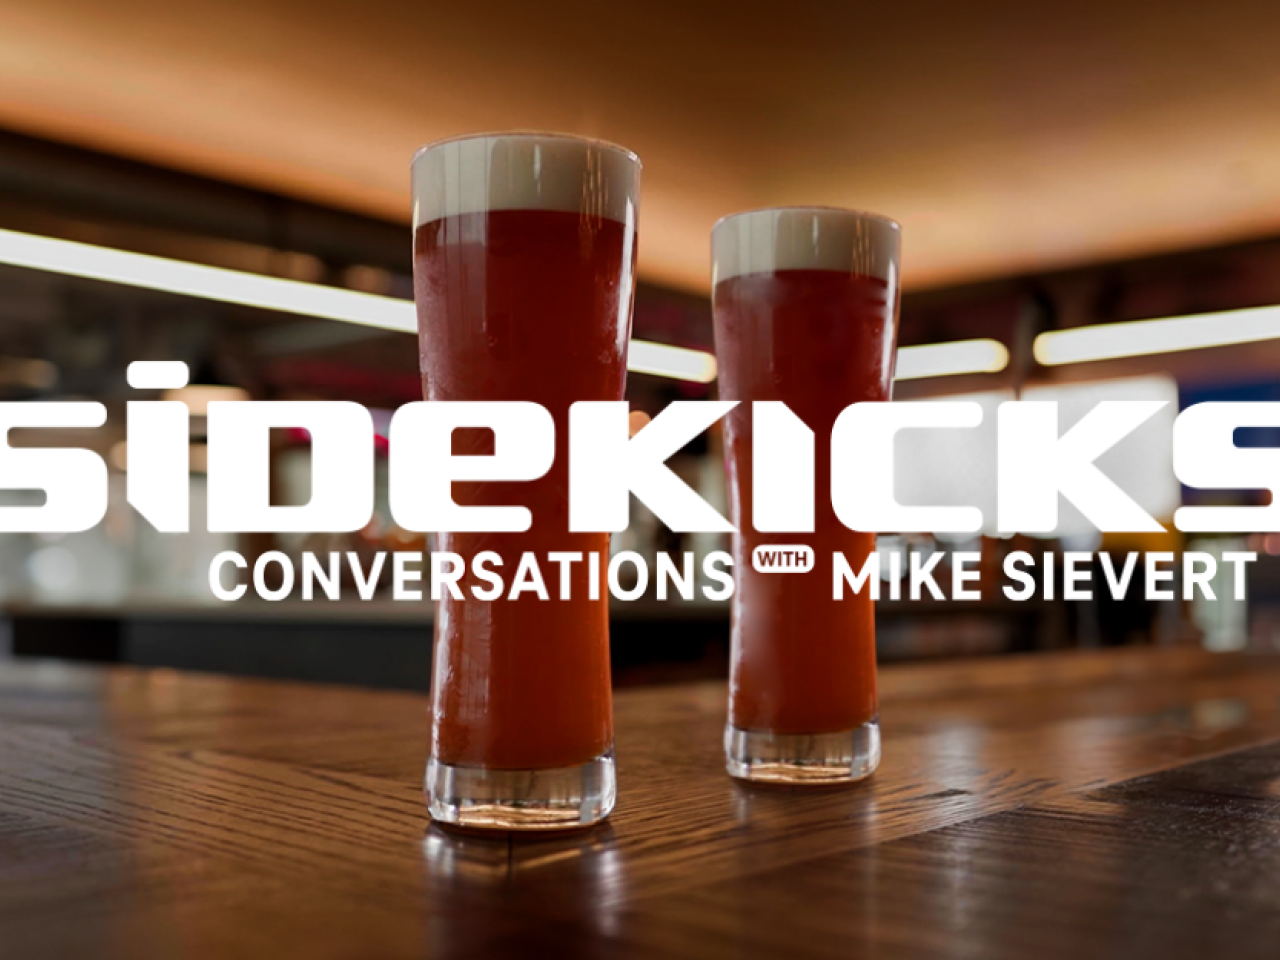 Glasses of beer with text overlaid that reads, "Sidekicks: Conversations with Mike Sievert"